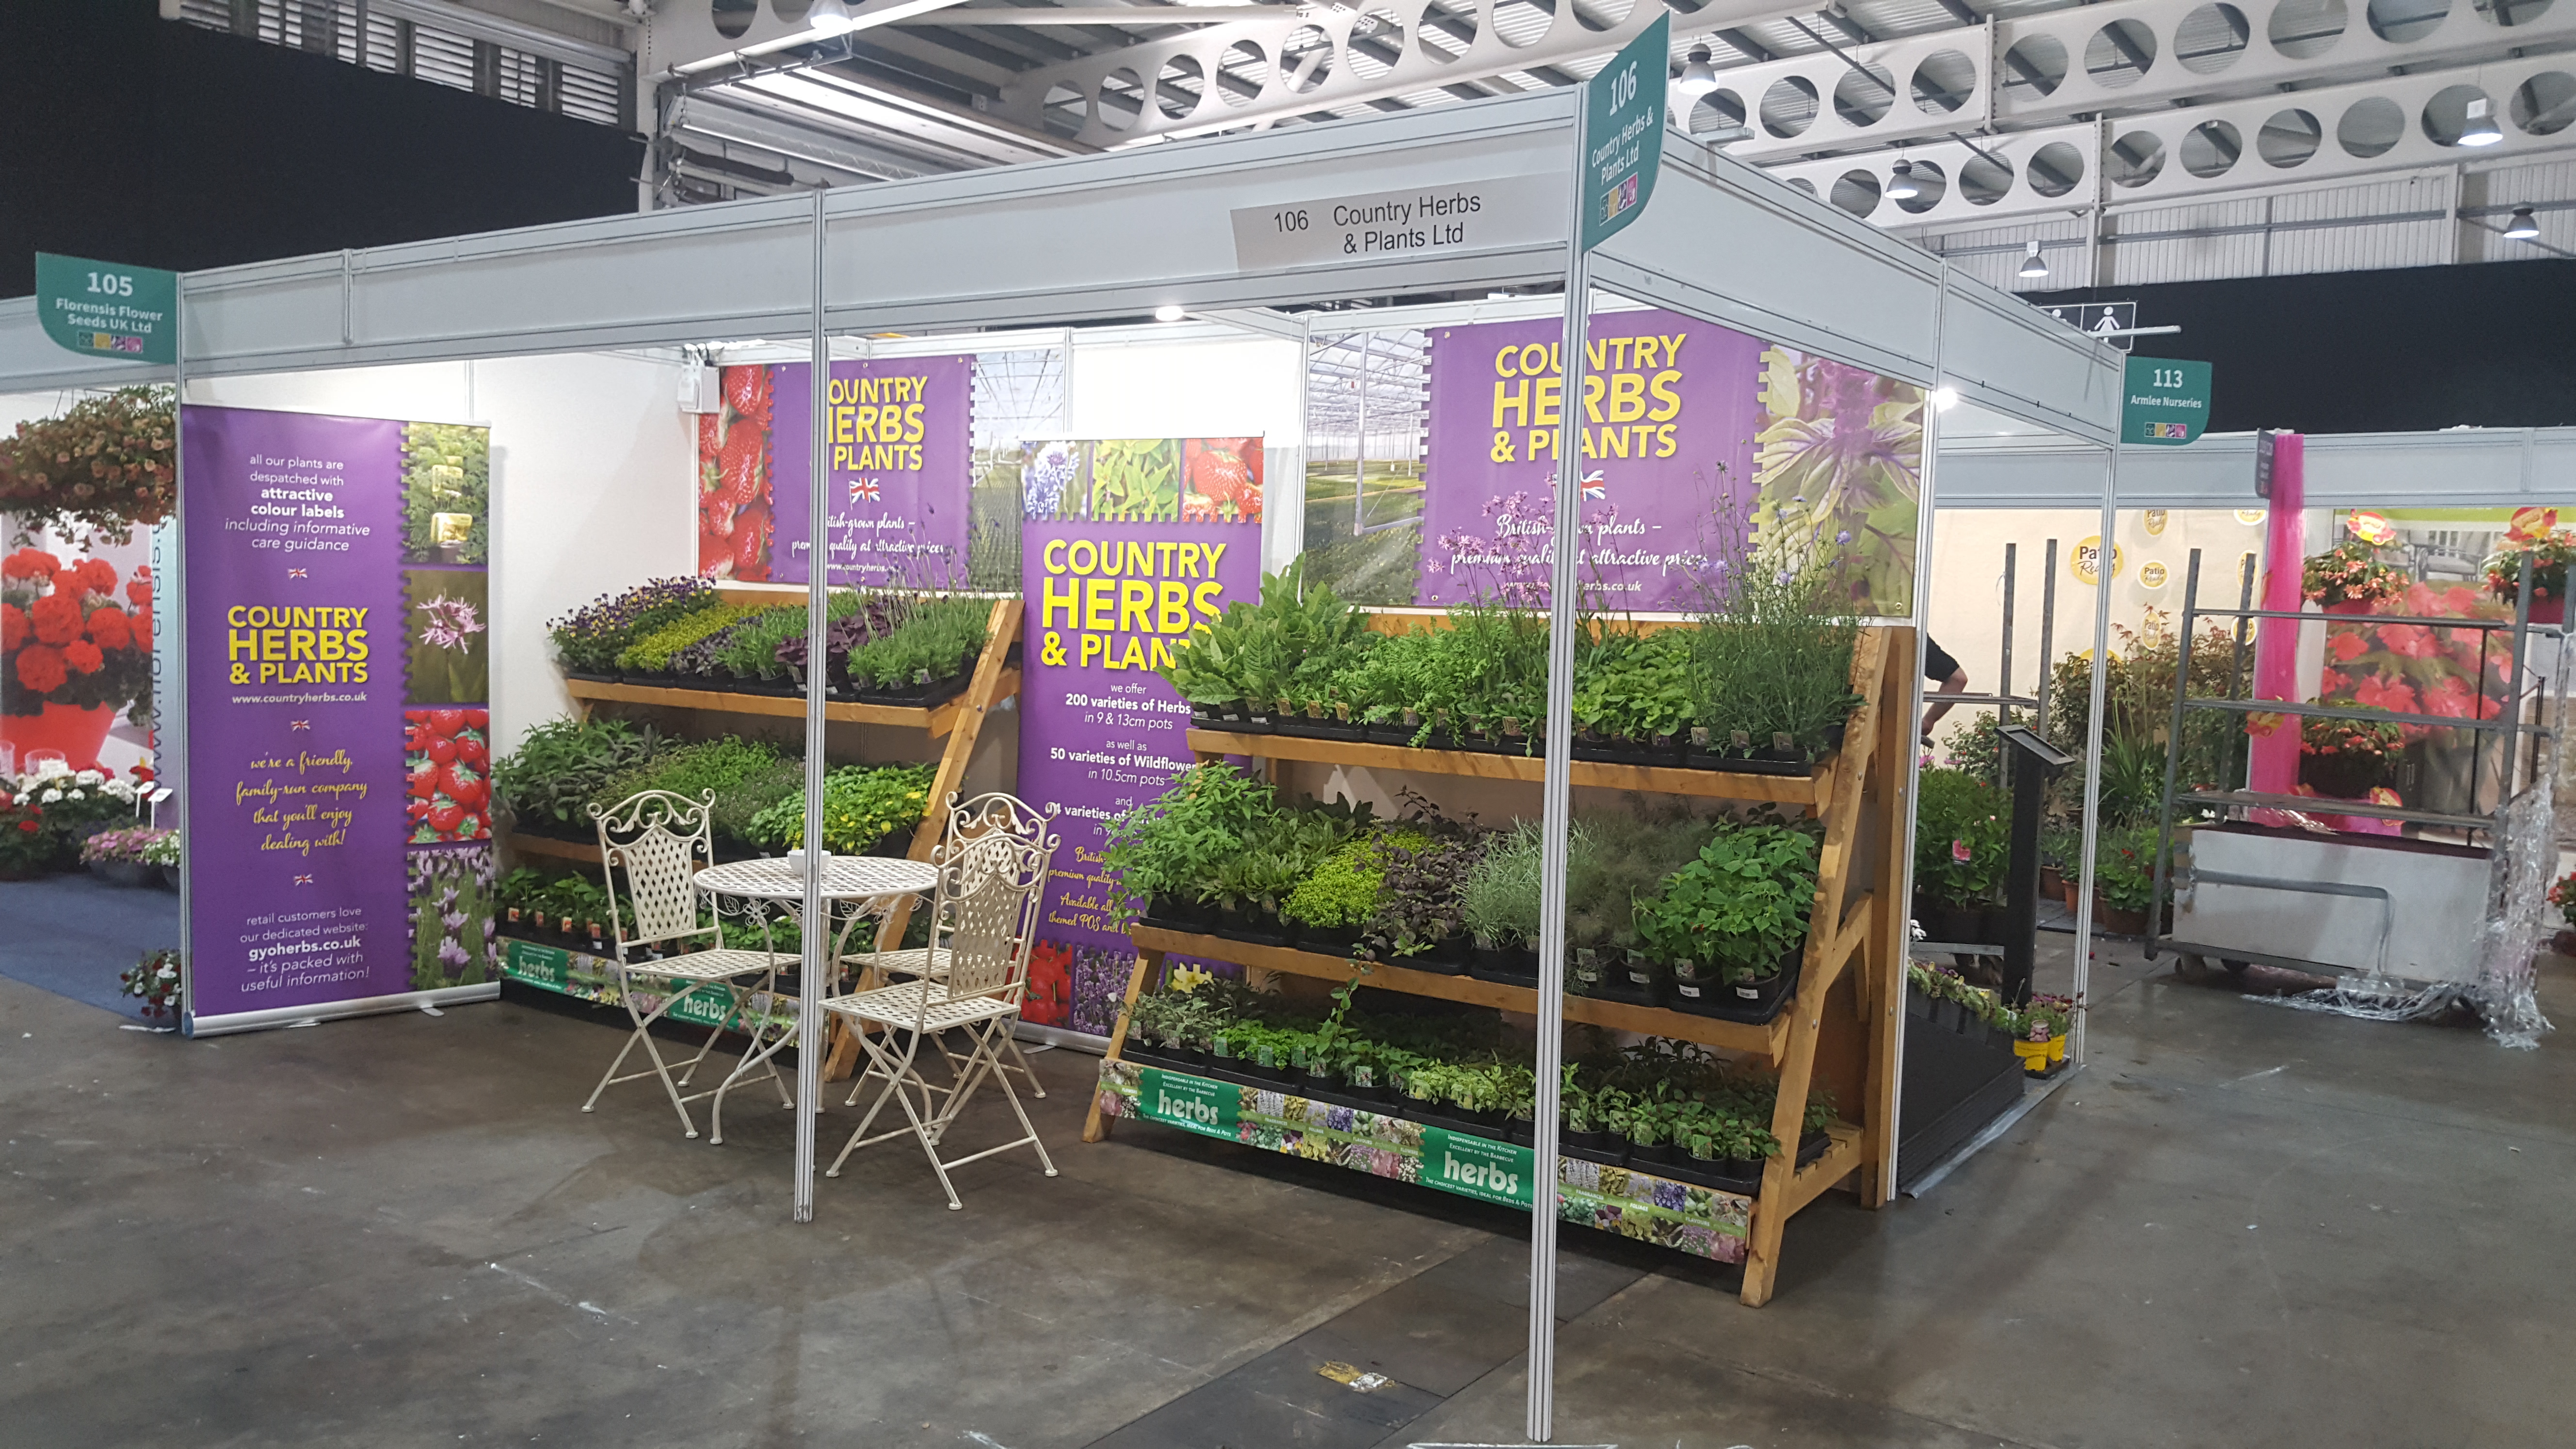 Come and visit us at the HTA National Plant Show 2017